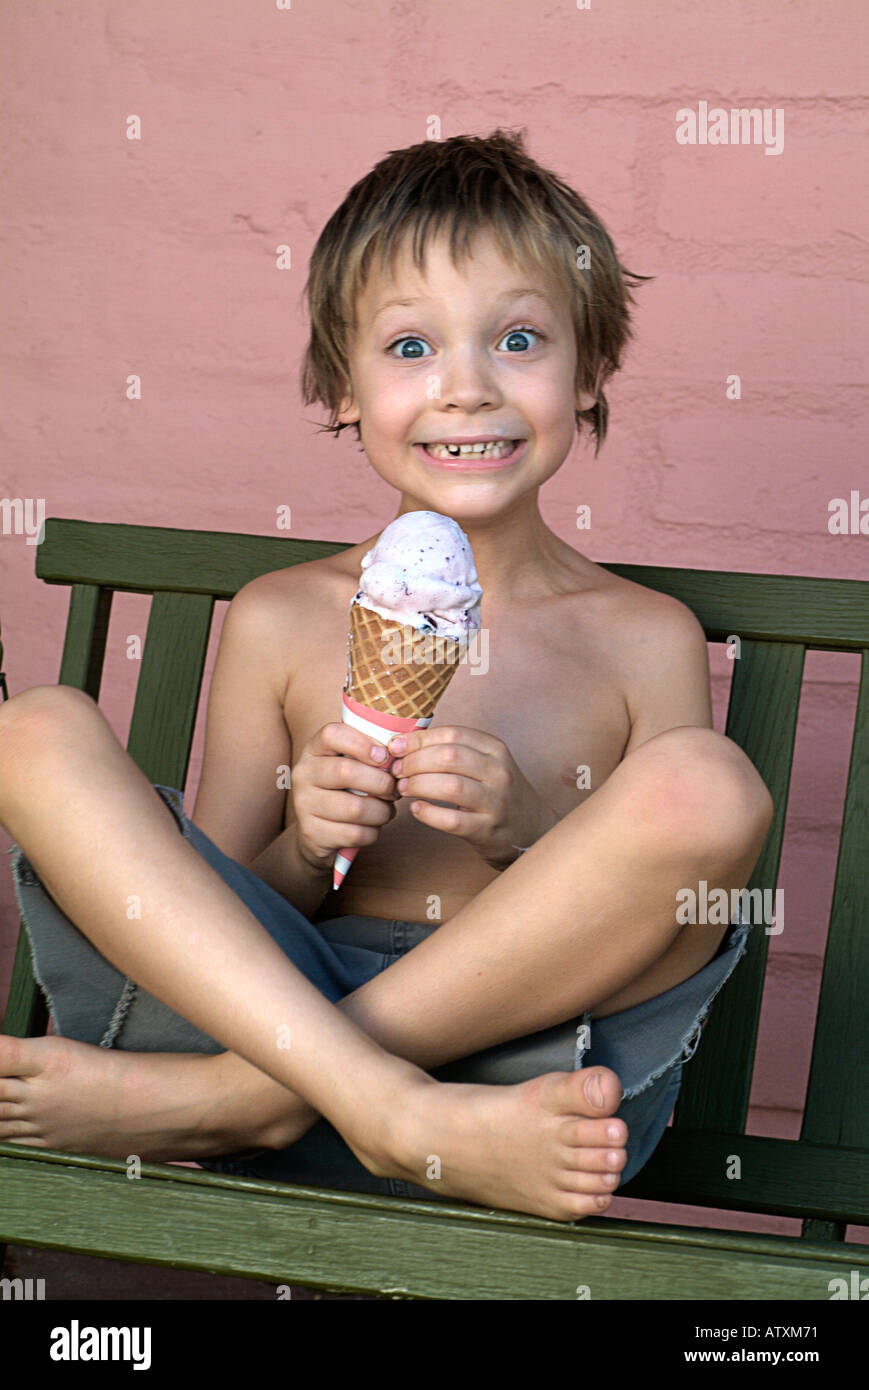 Boy eating ice cream cone on a hot summers day. Stock Photo